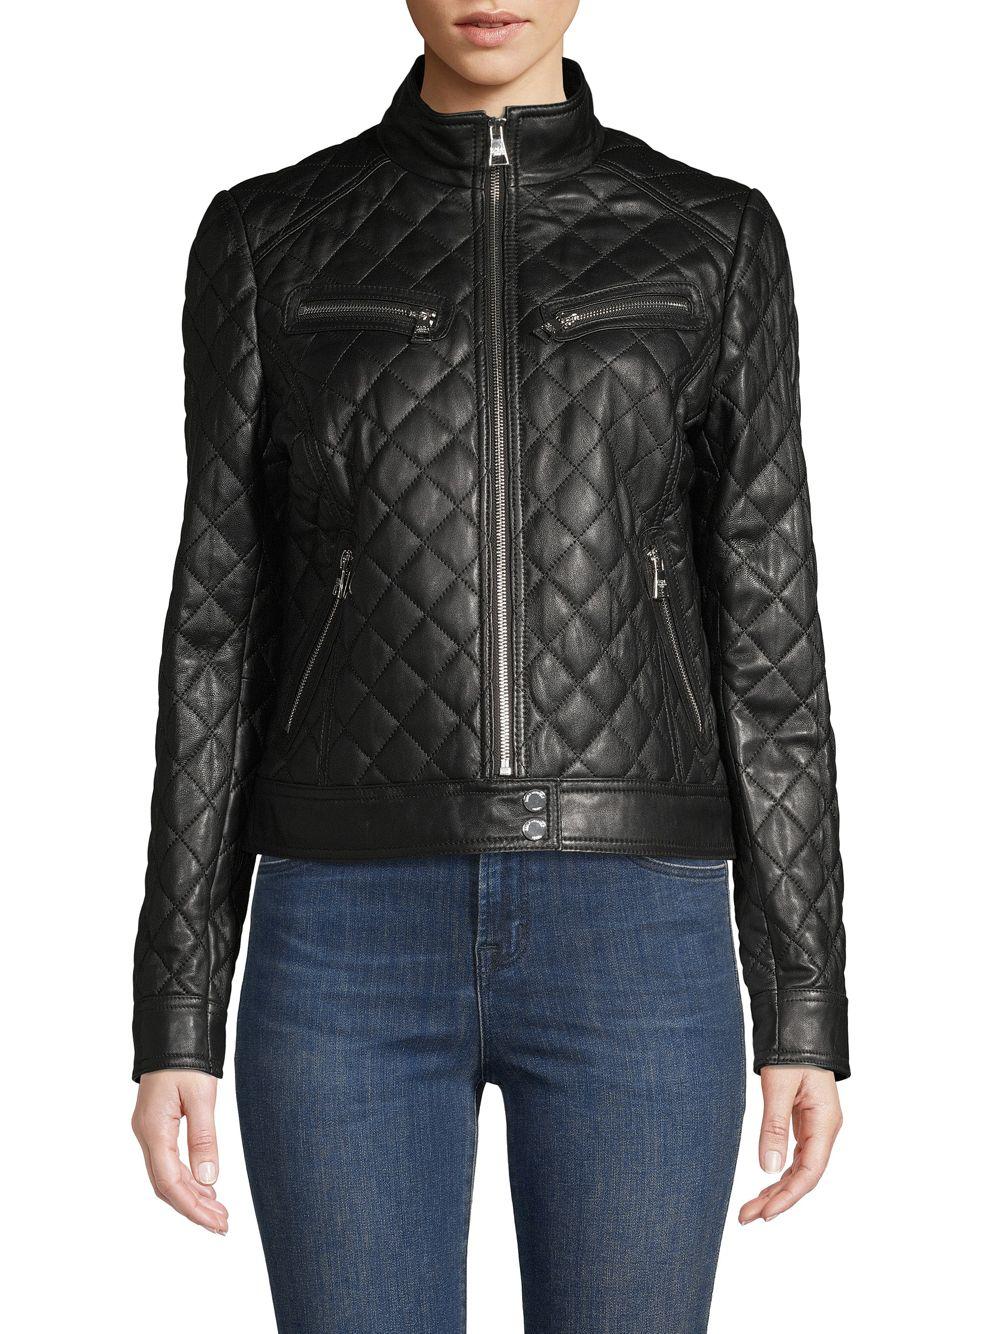 Karl Lagerfeld Quilted Leather Jacket in Black - Lyst